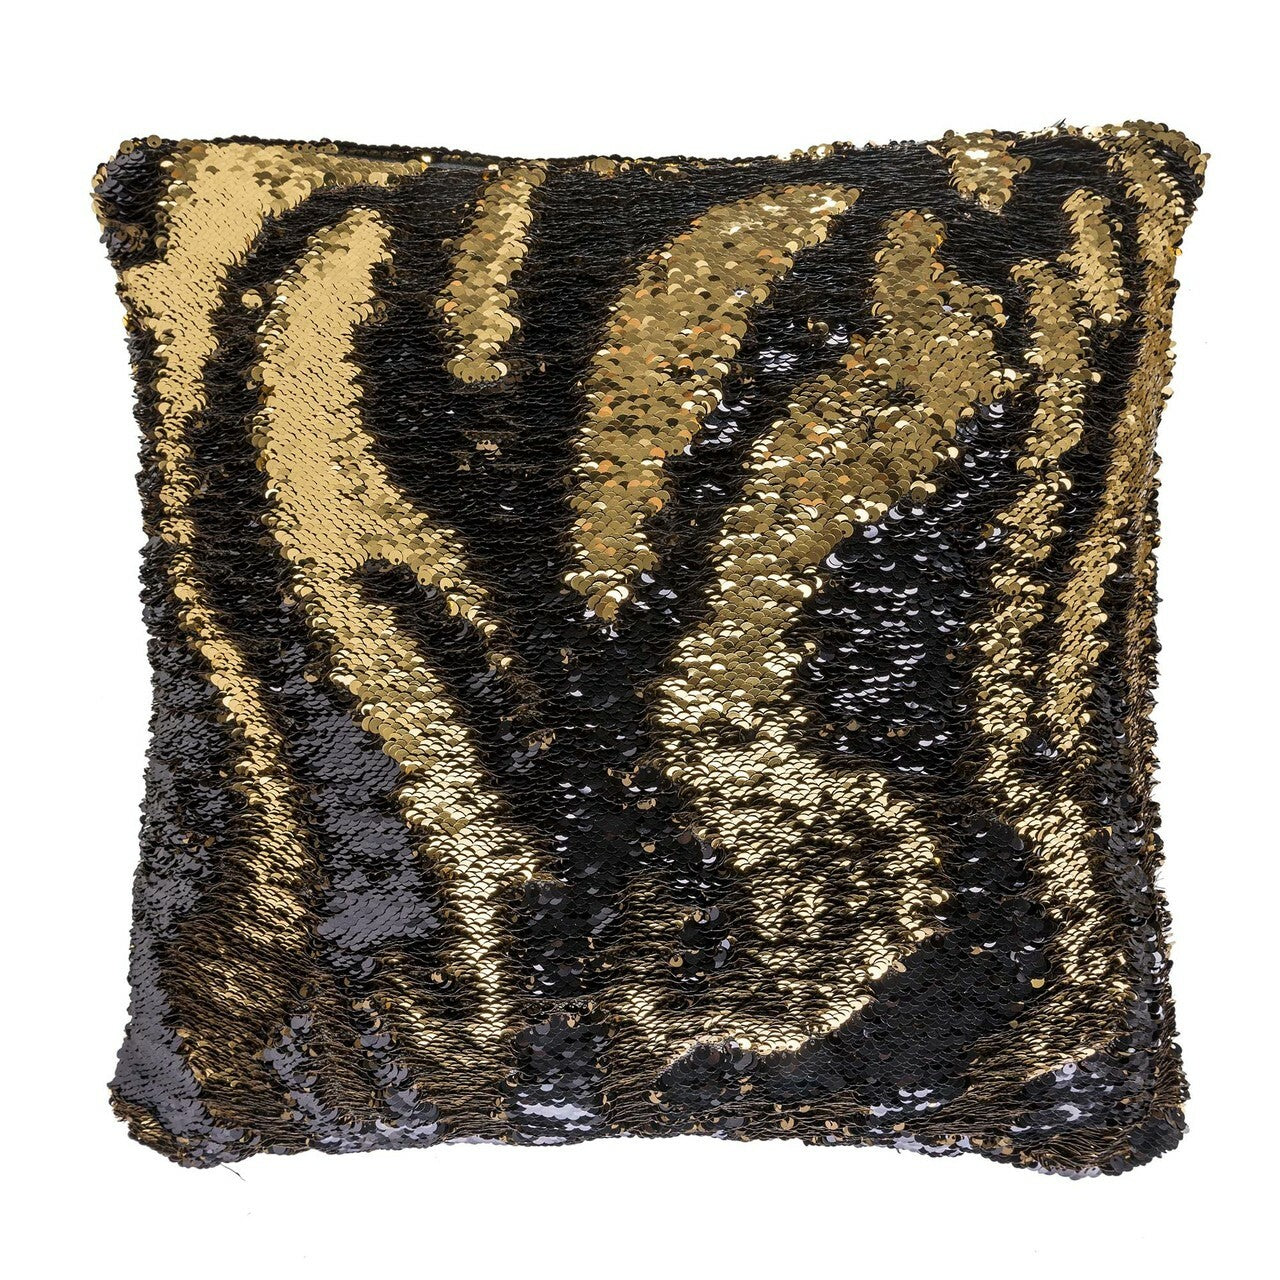 Sofa Cushion Cover Made from Sequin-Covered Satin Fabric with Reversible Two-Toned Design in Black and Gold - 12 Inch